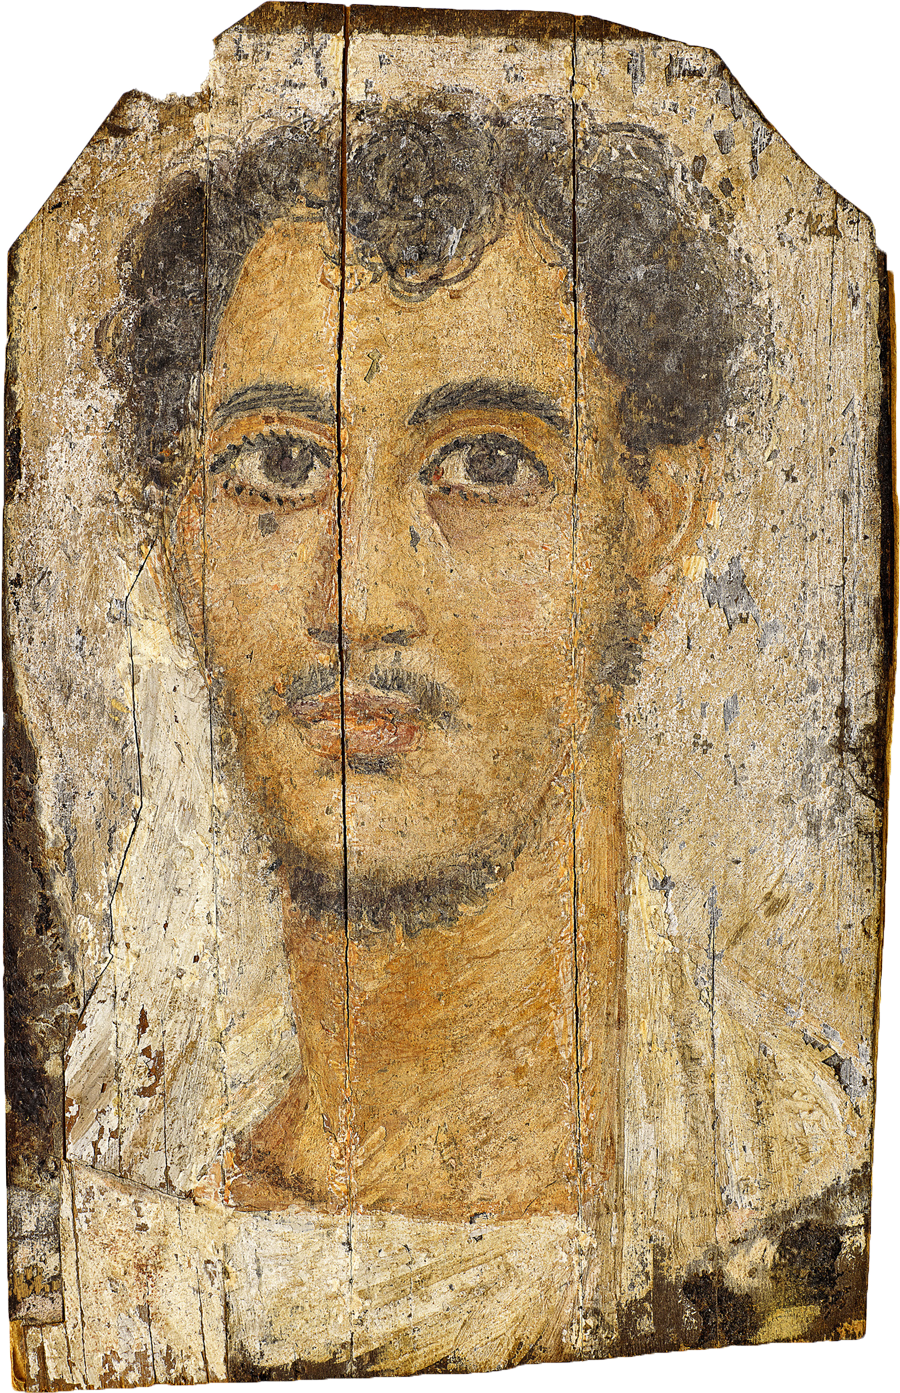 Head of young man. Tempera (probably) painting on wood.